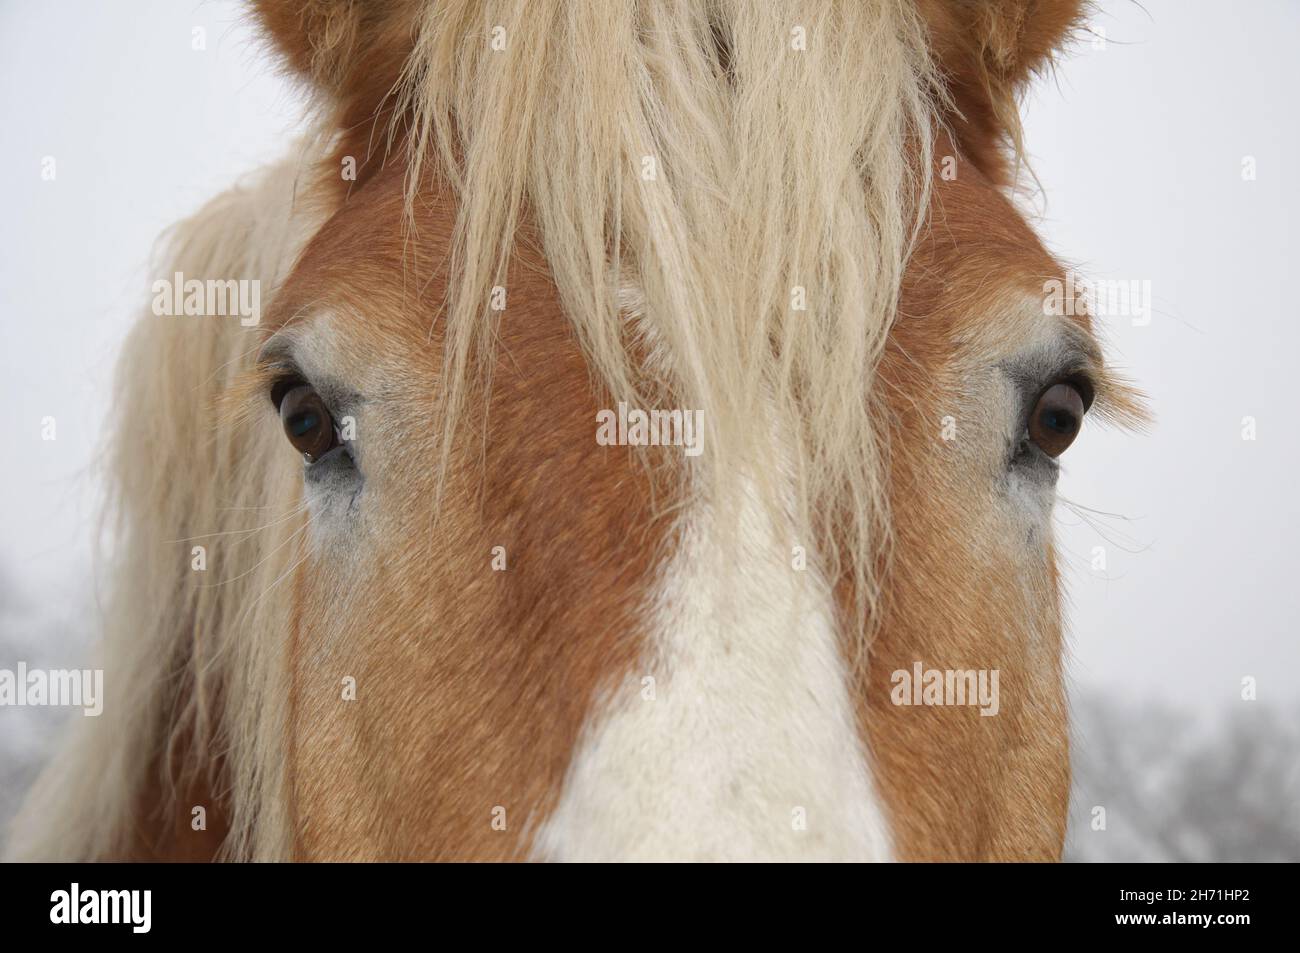 Closeup of a face of a Belgian draft horse, with both eyes visible Stock Photo